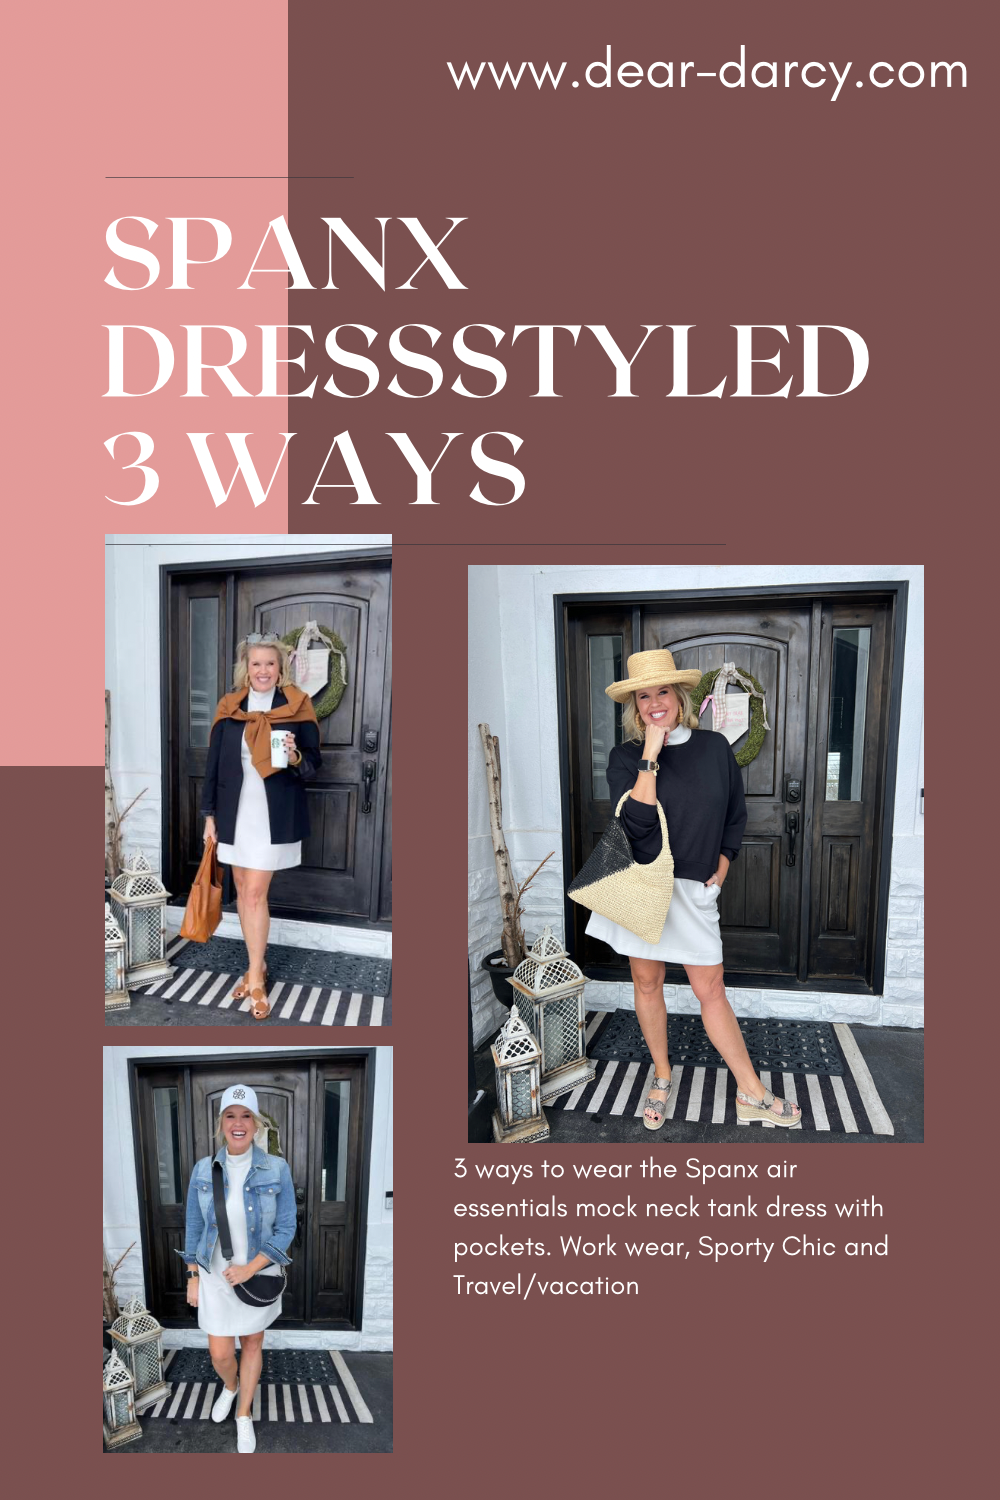 3 Ways To Style The Spanx Air Essential Dress.